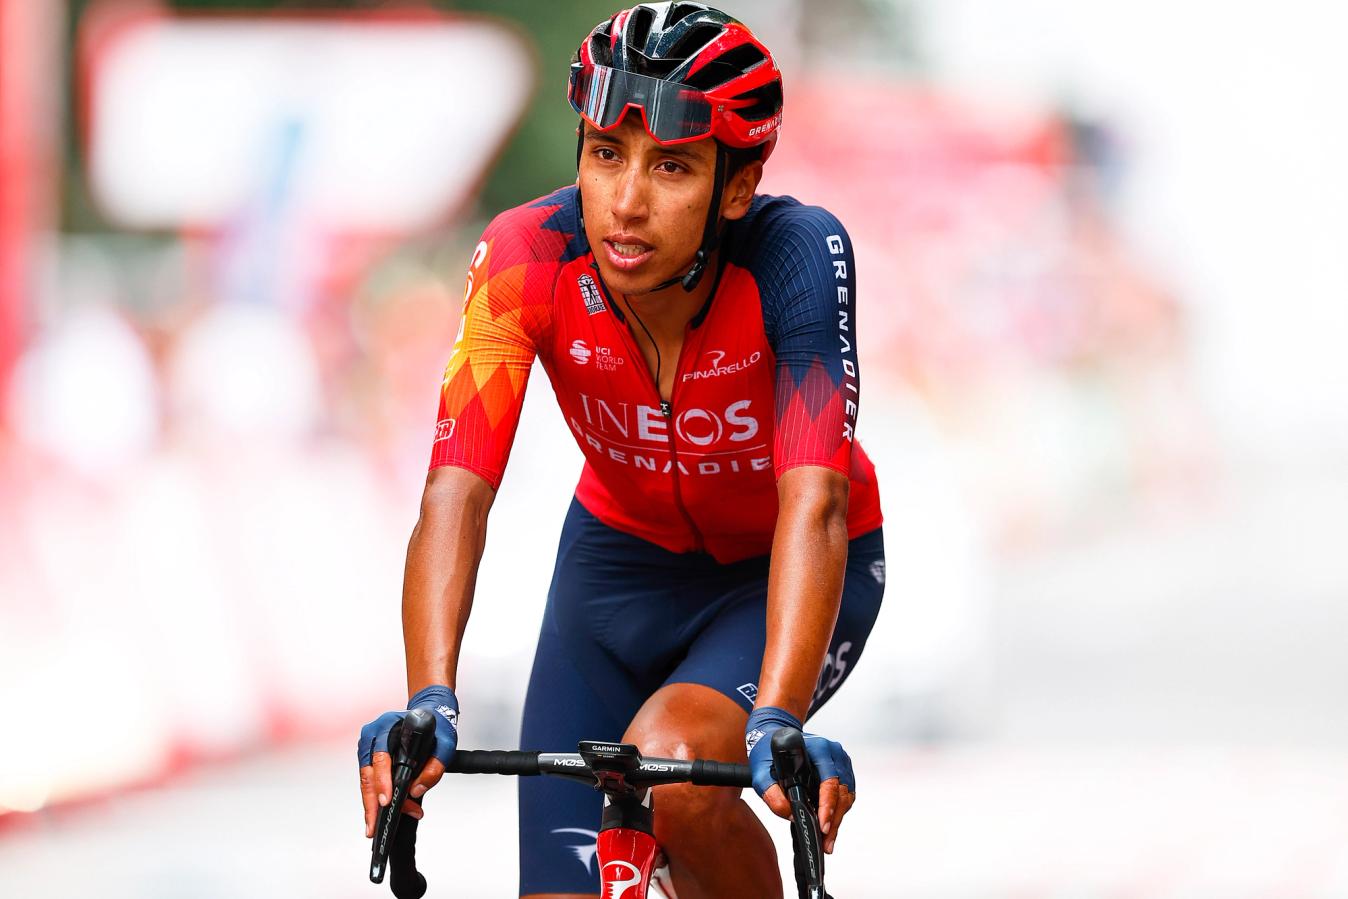 For Egan Bernal to finish two Grand Tours in a season is an achievement in itself, given his recovery